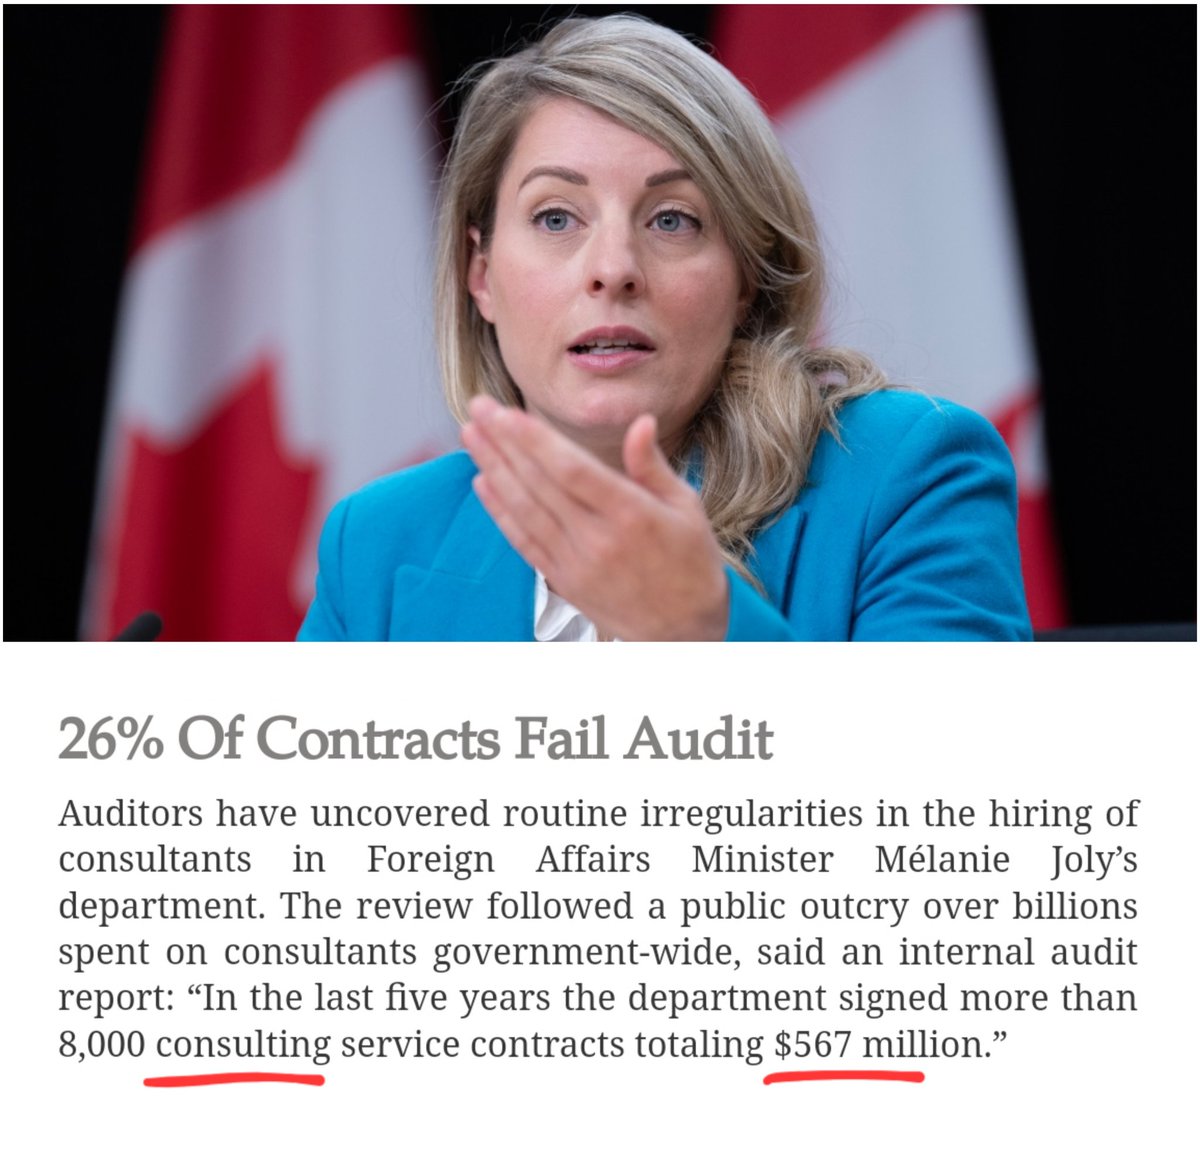 Liberal MP Mélanie Joly's department spent over $567M on 8,000 consulting contracts and 26% of them failed an audit. It's a free for all the pigs at the trought with this government. Every single department is completely mismanaged and costing tax payers billions. The next…